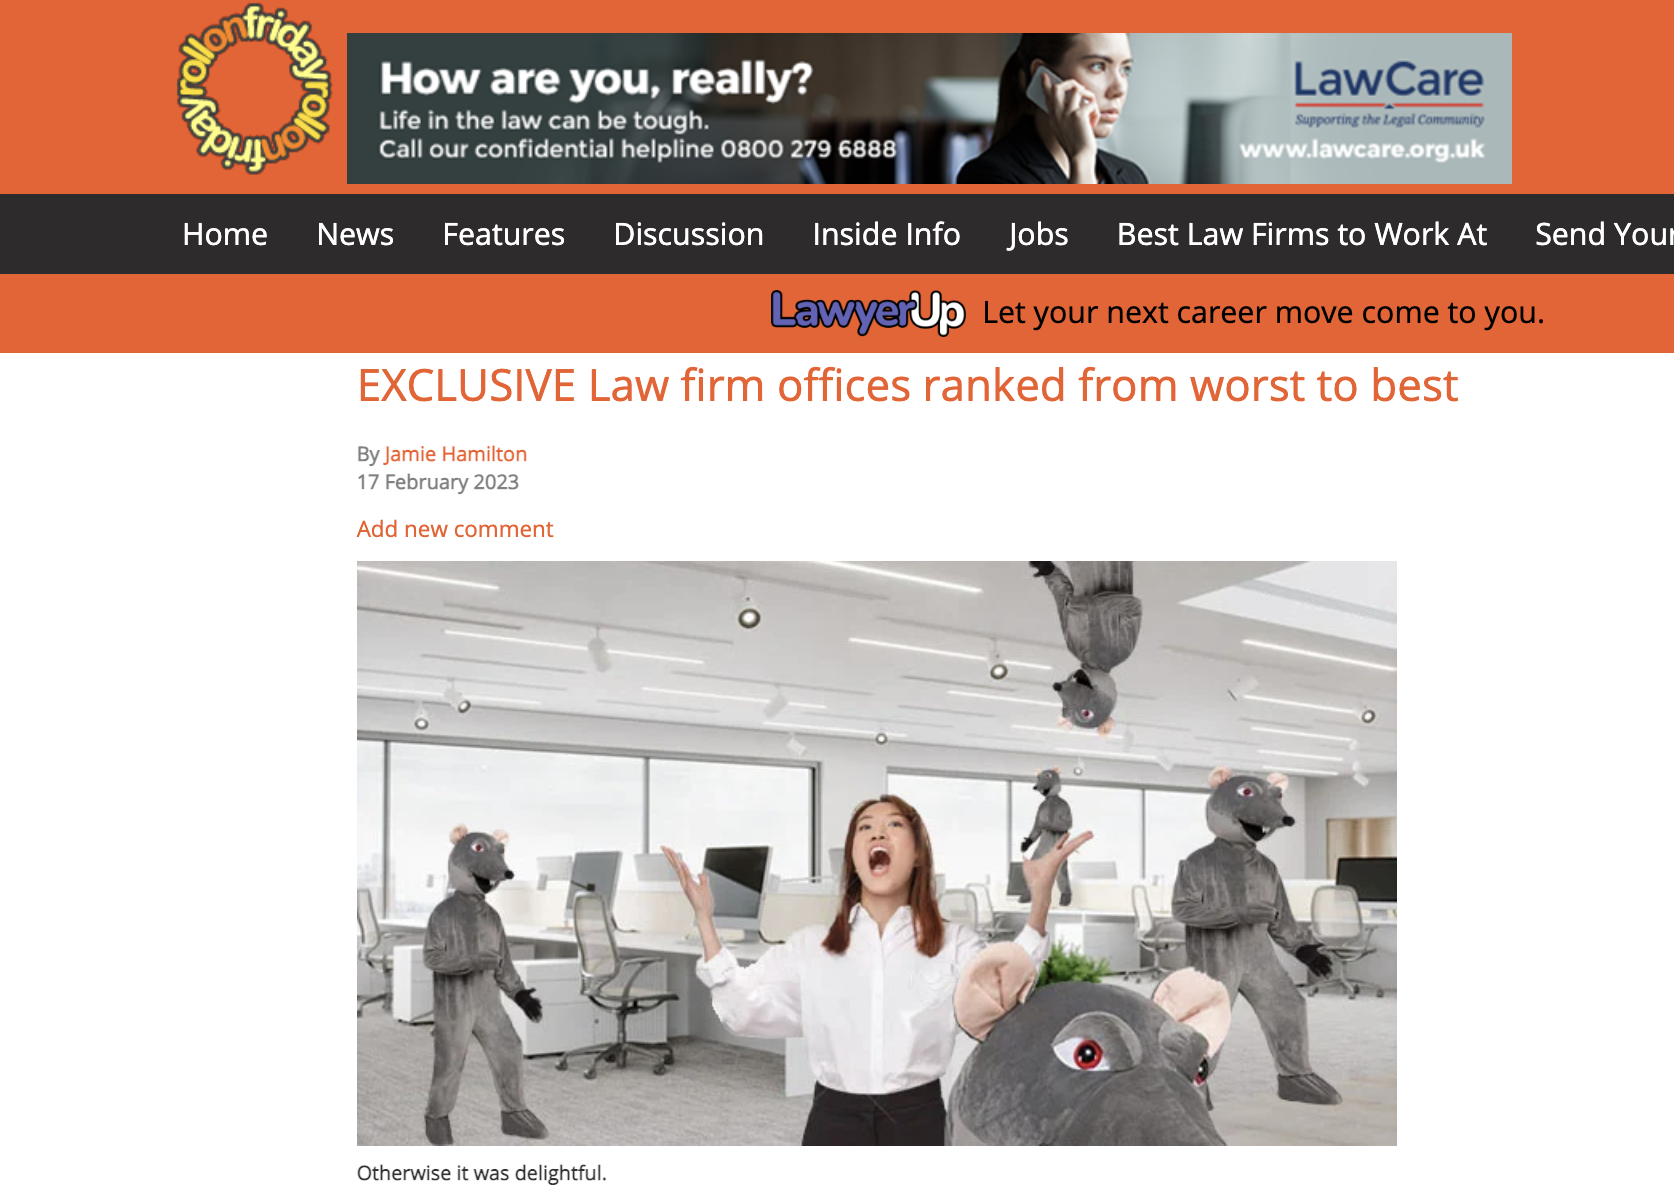 THE BEST LAW FIRM OFFICES